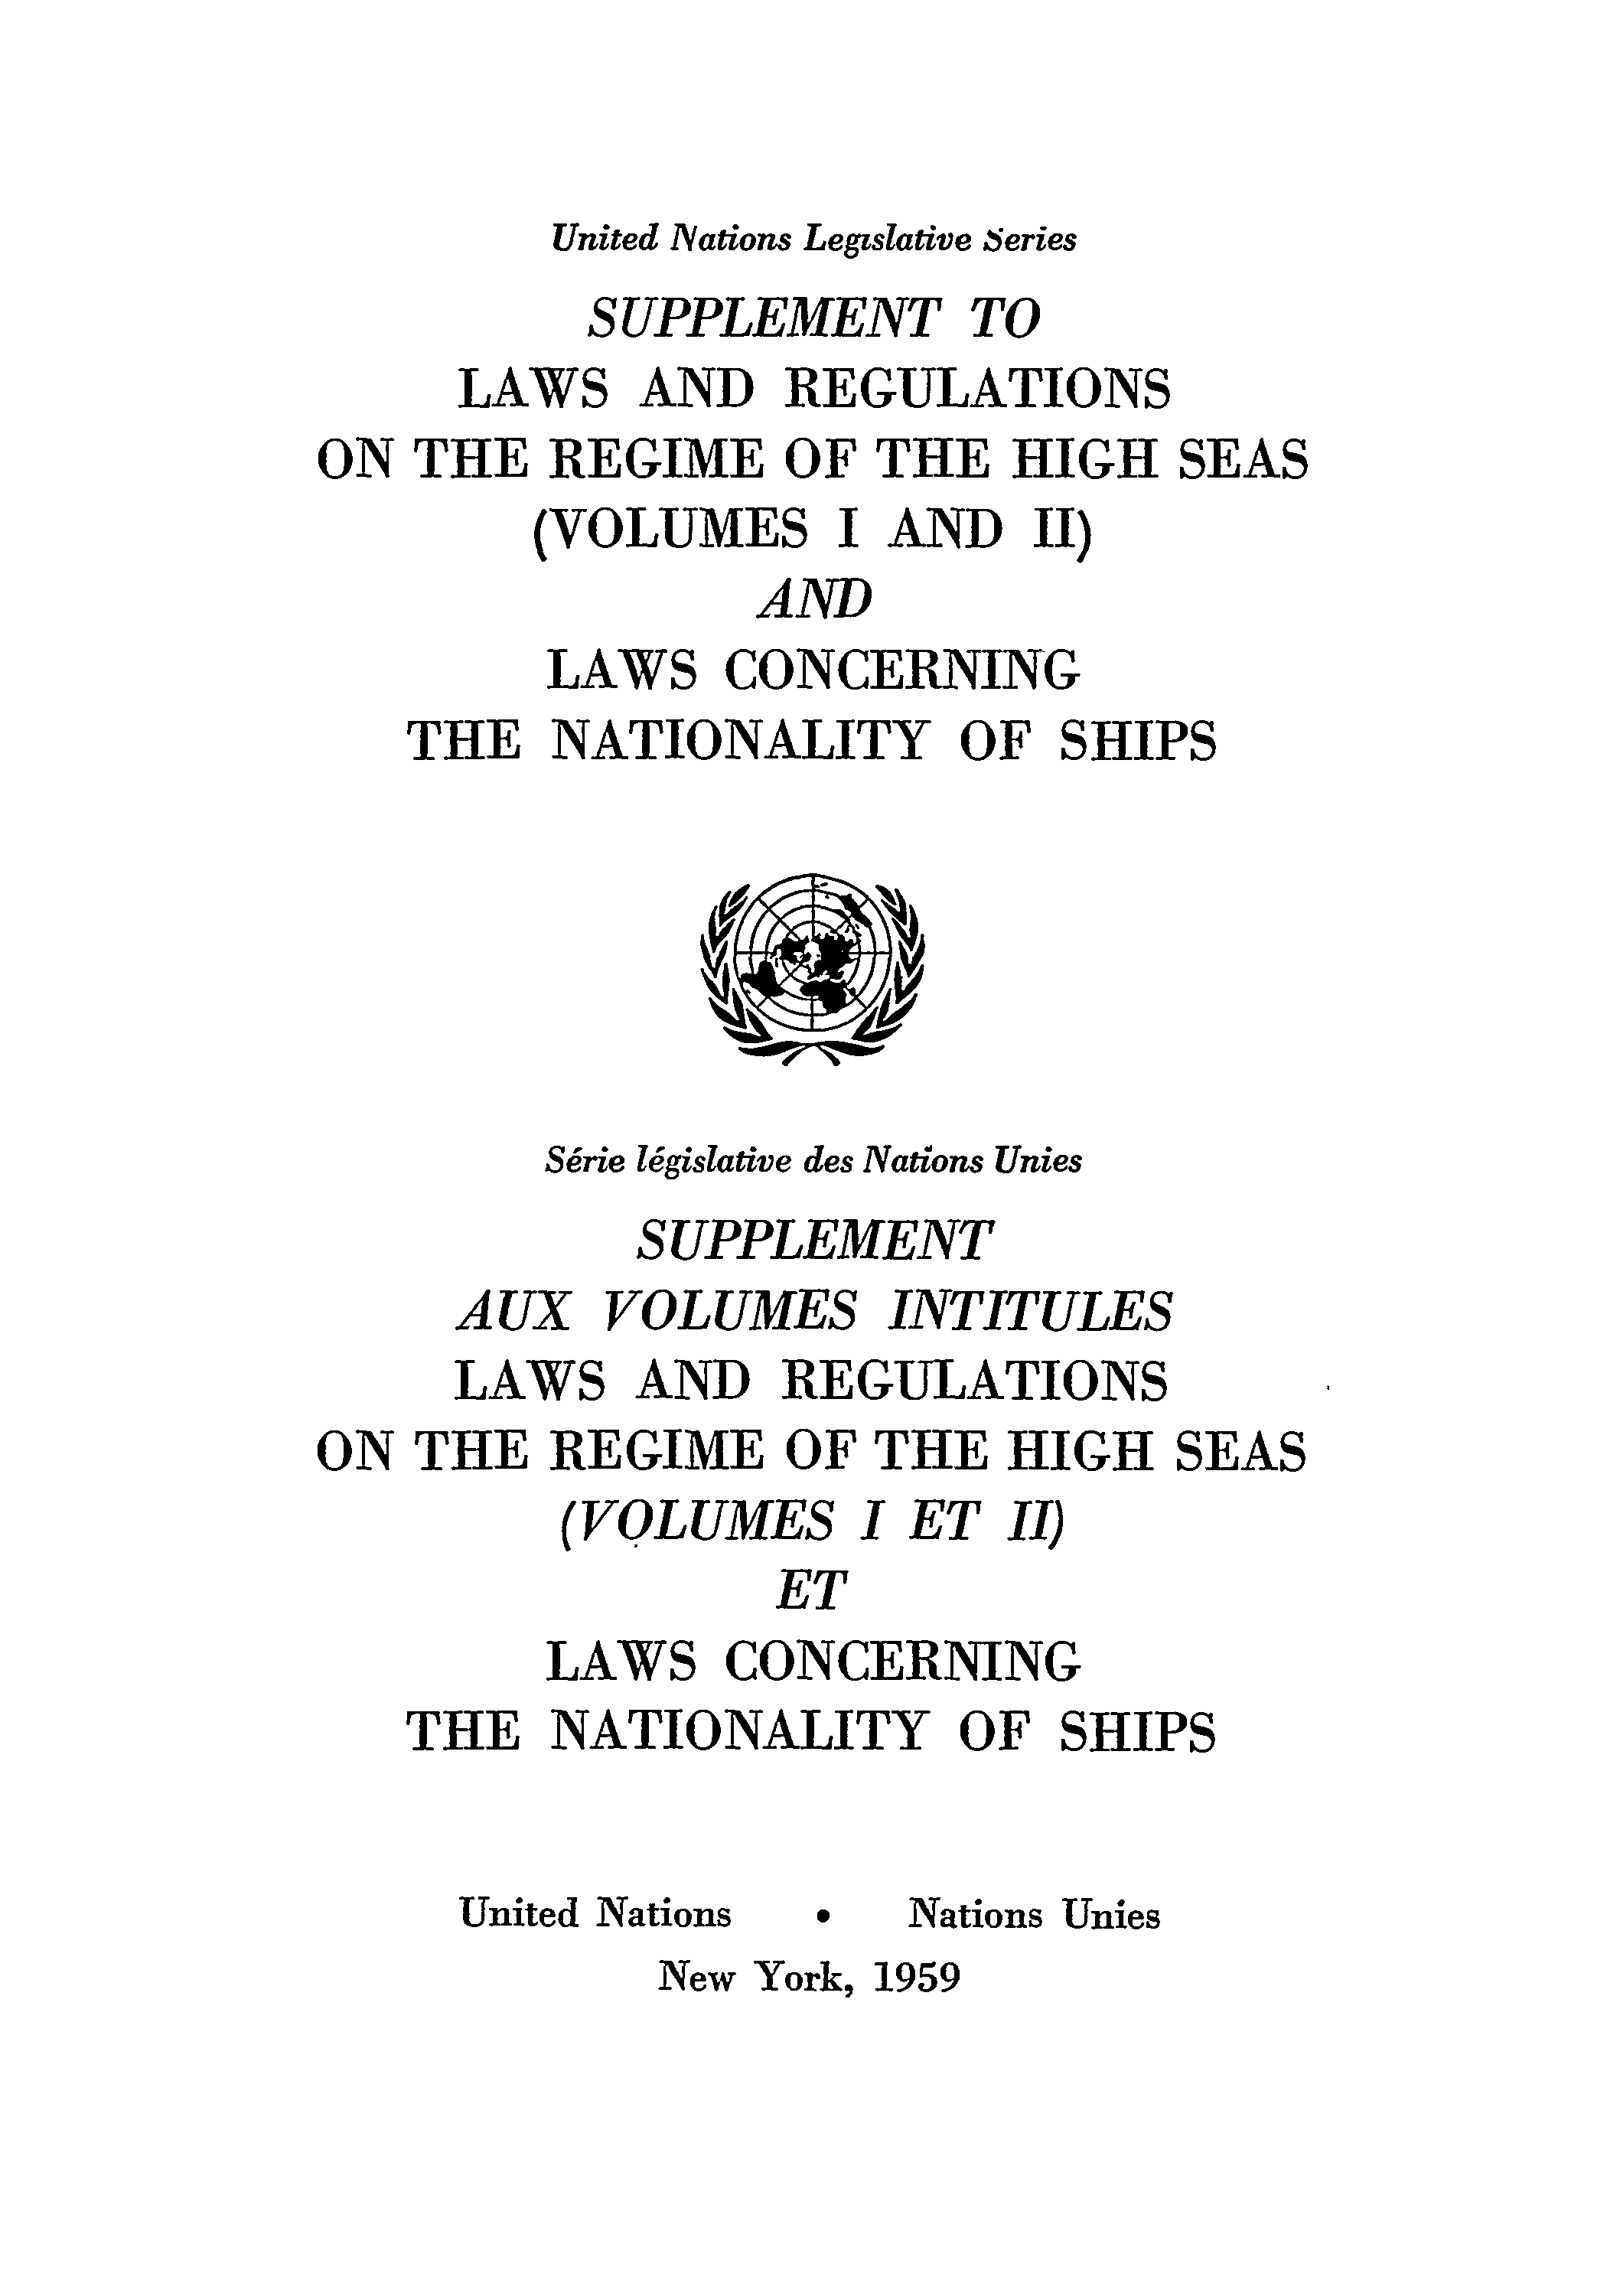 image of Supplement aux volumes intitules Laws and Regulations on the Regime of the High Seas (Volumes I et II) et Laws Concerning the Nationality of Ships